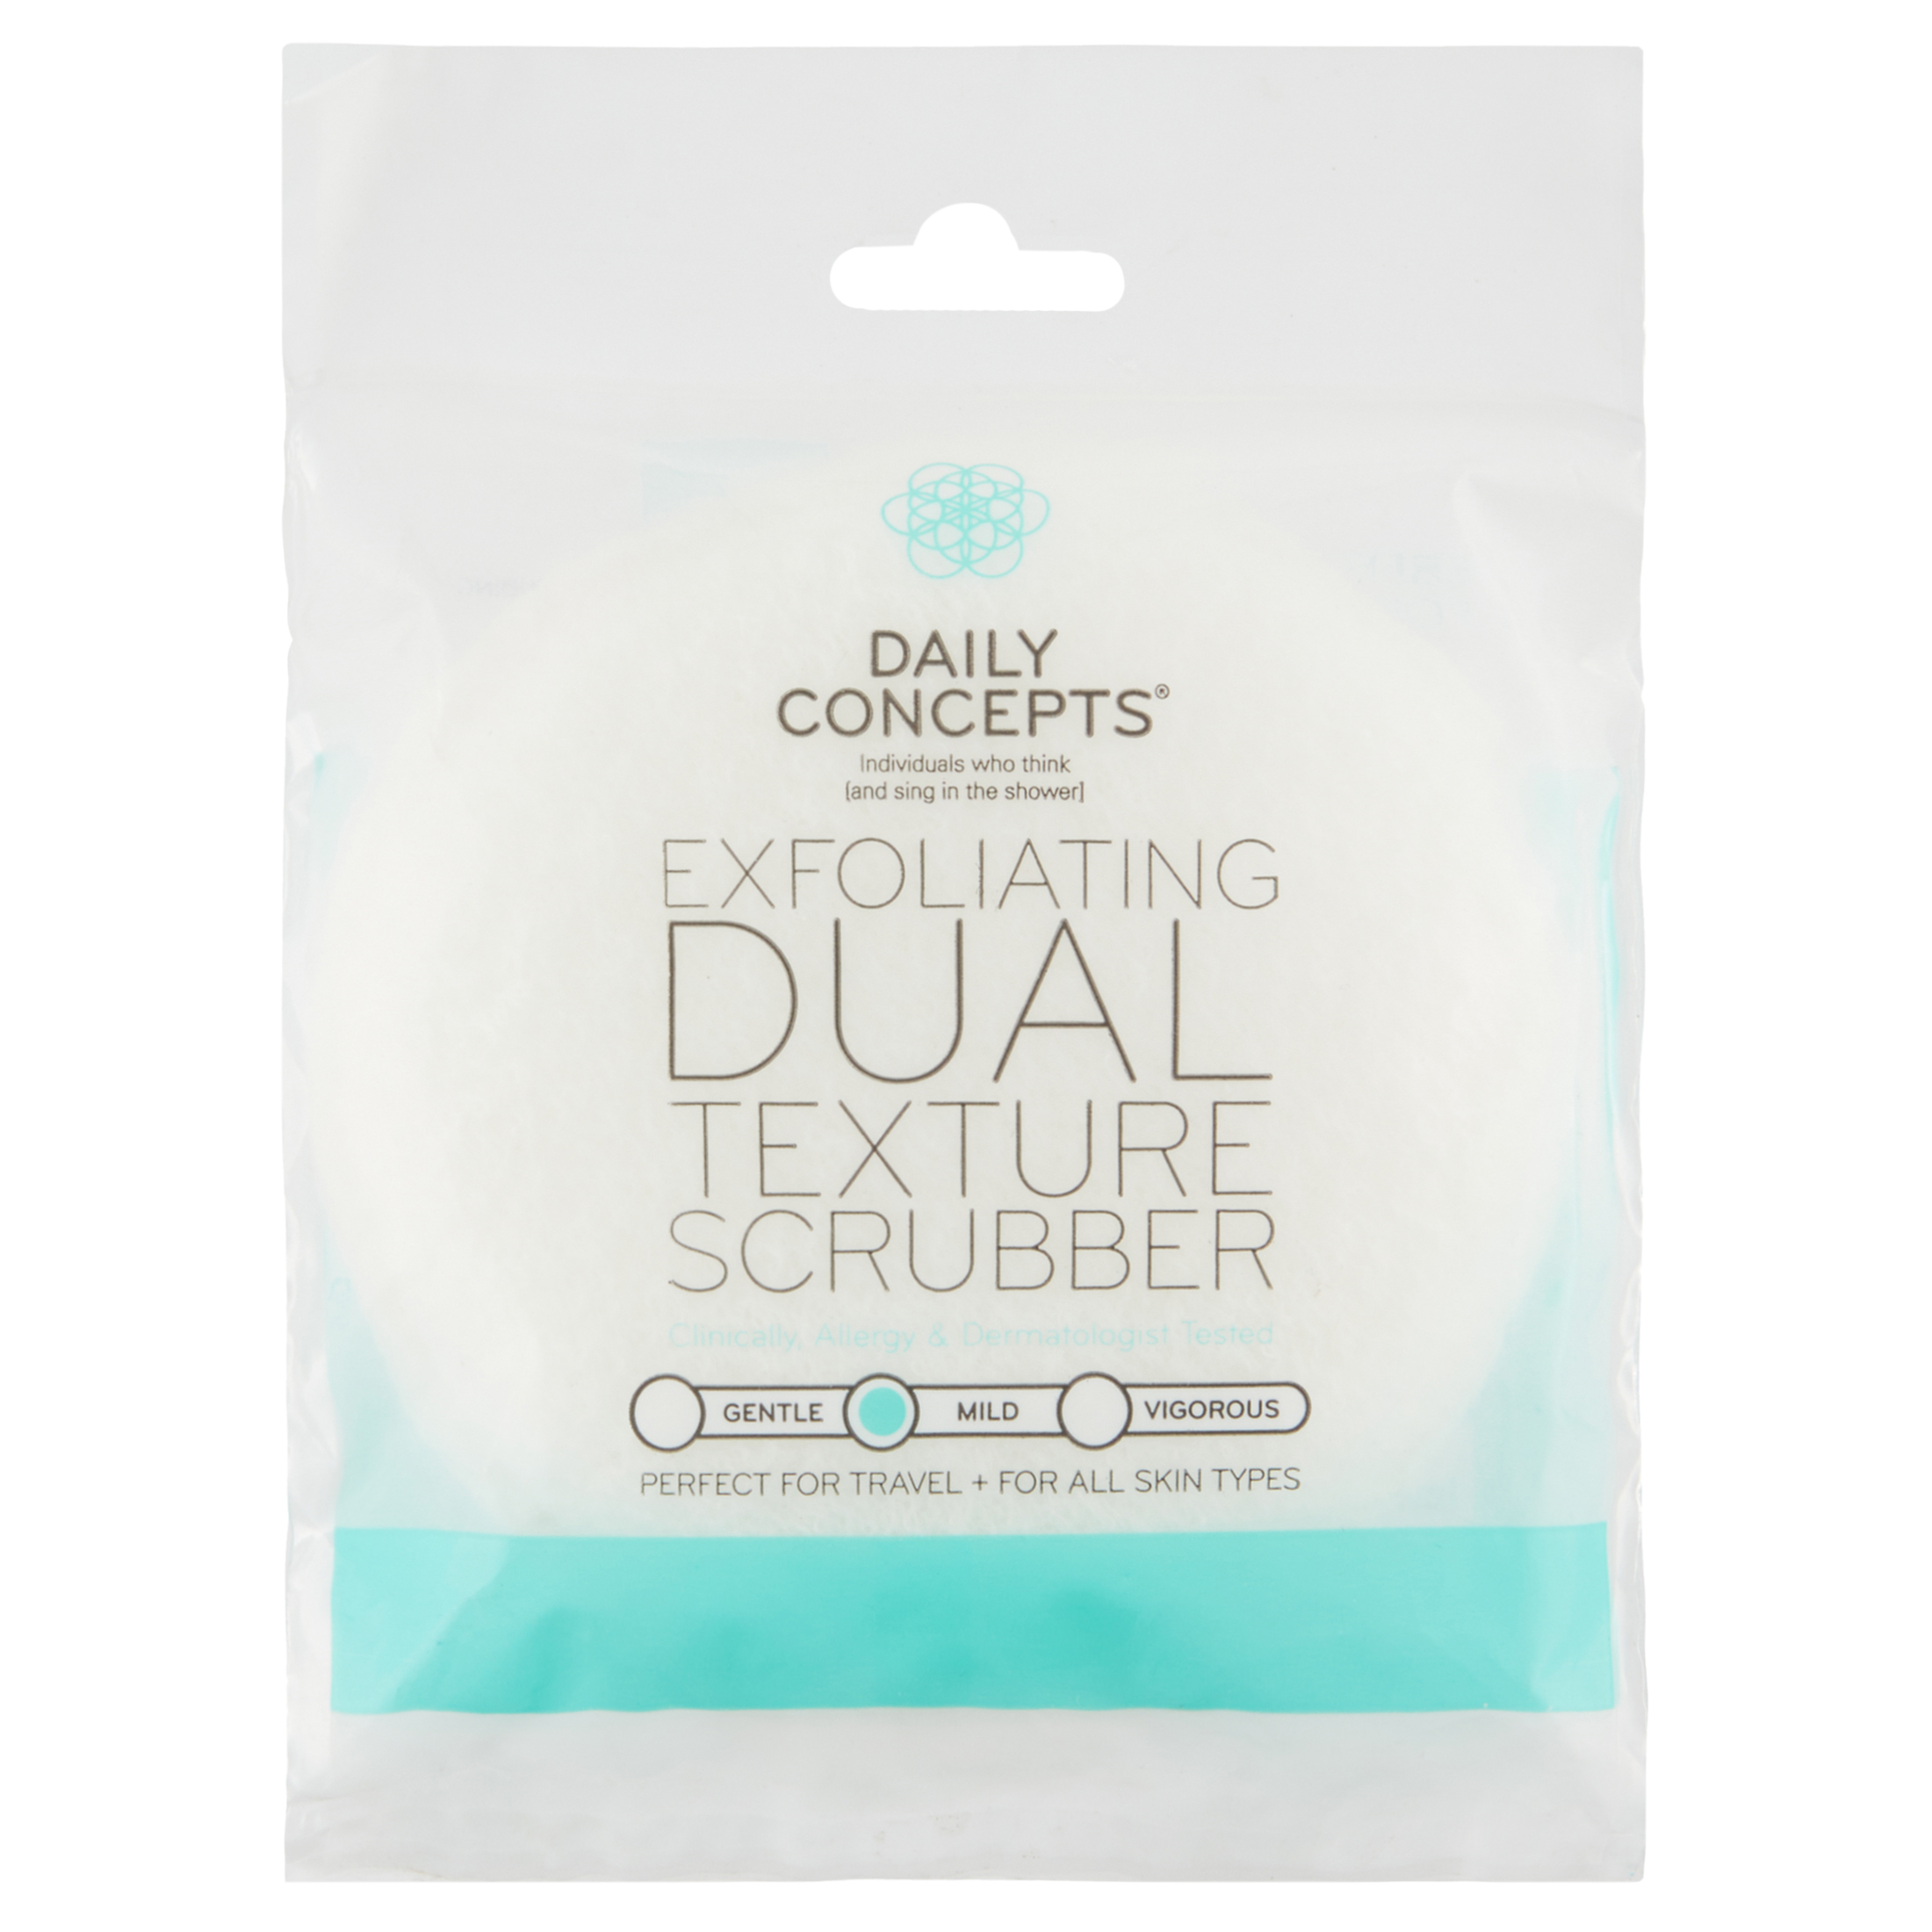 Daily Dual Foot Scrubber by Daily Concepts luxury bath and spa tools –  DAILY CONCEPTS